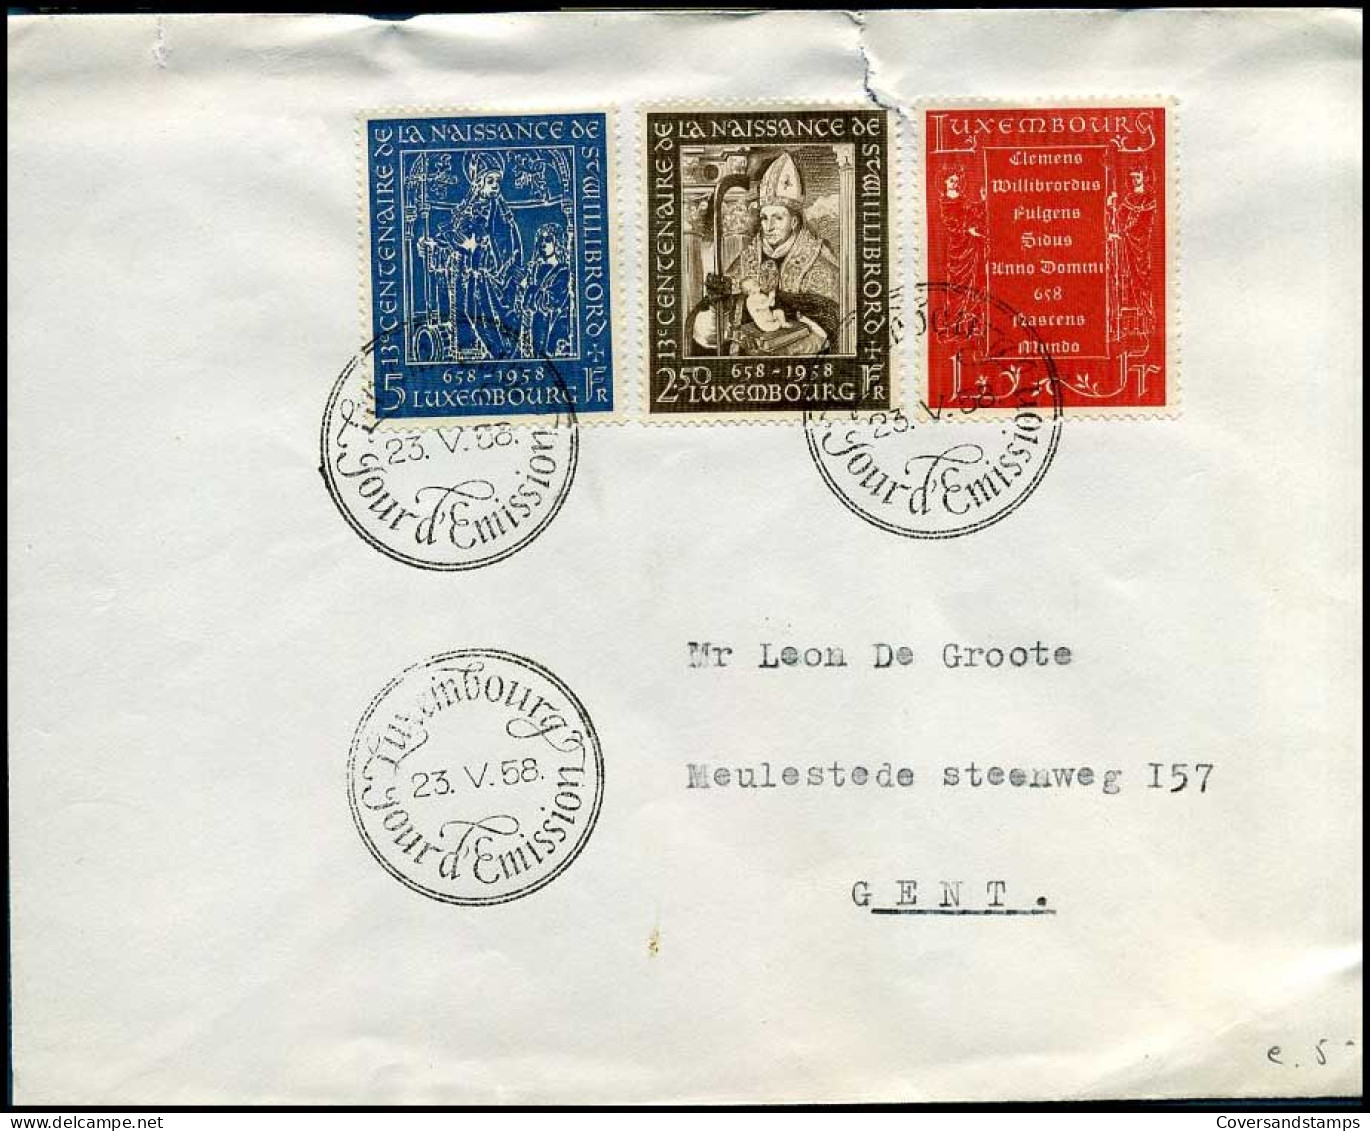 Luxemburg Cover To Belgium - Stamped Stationery